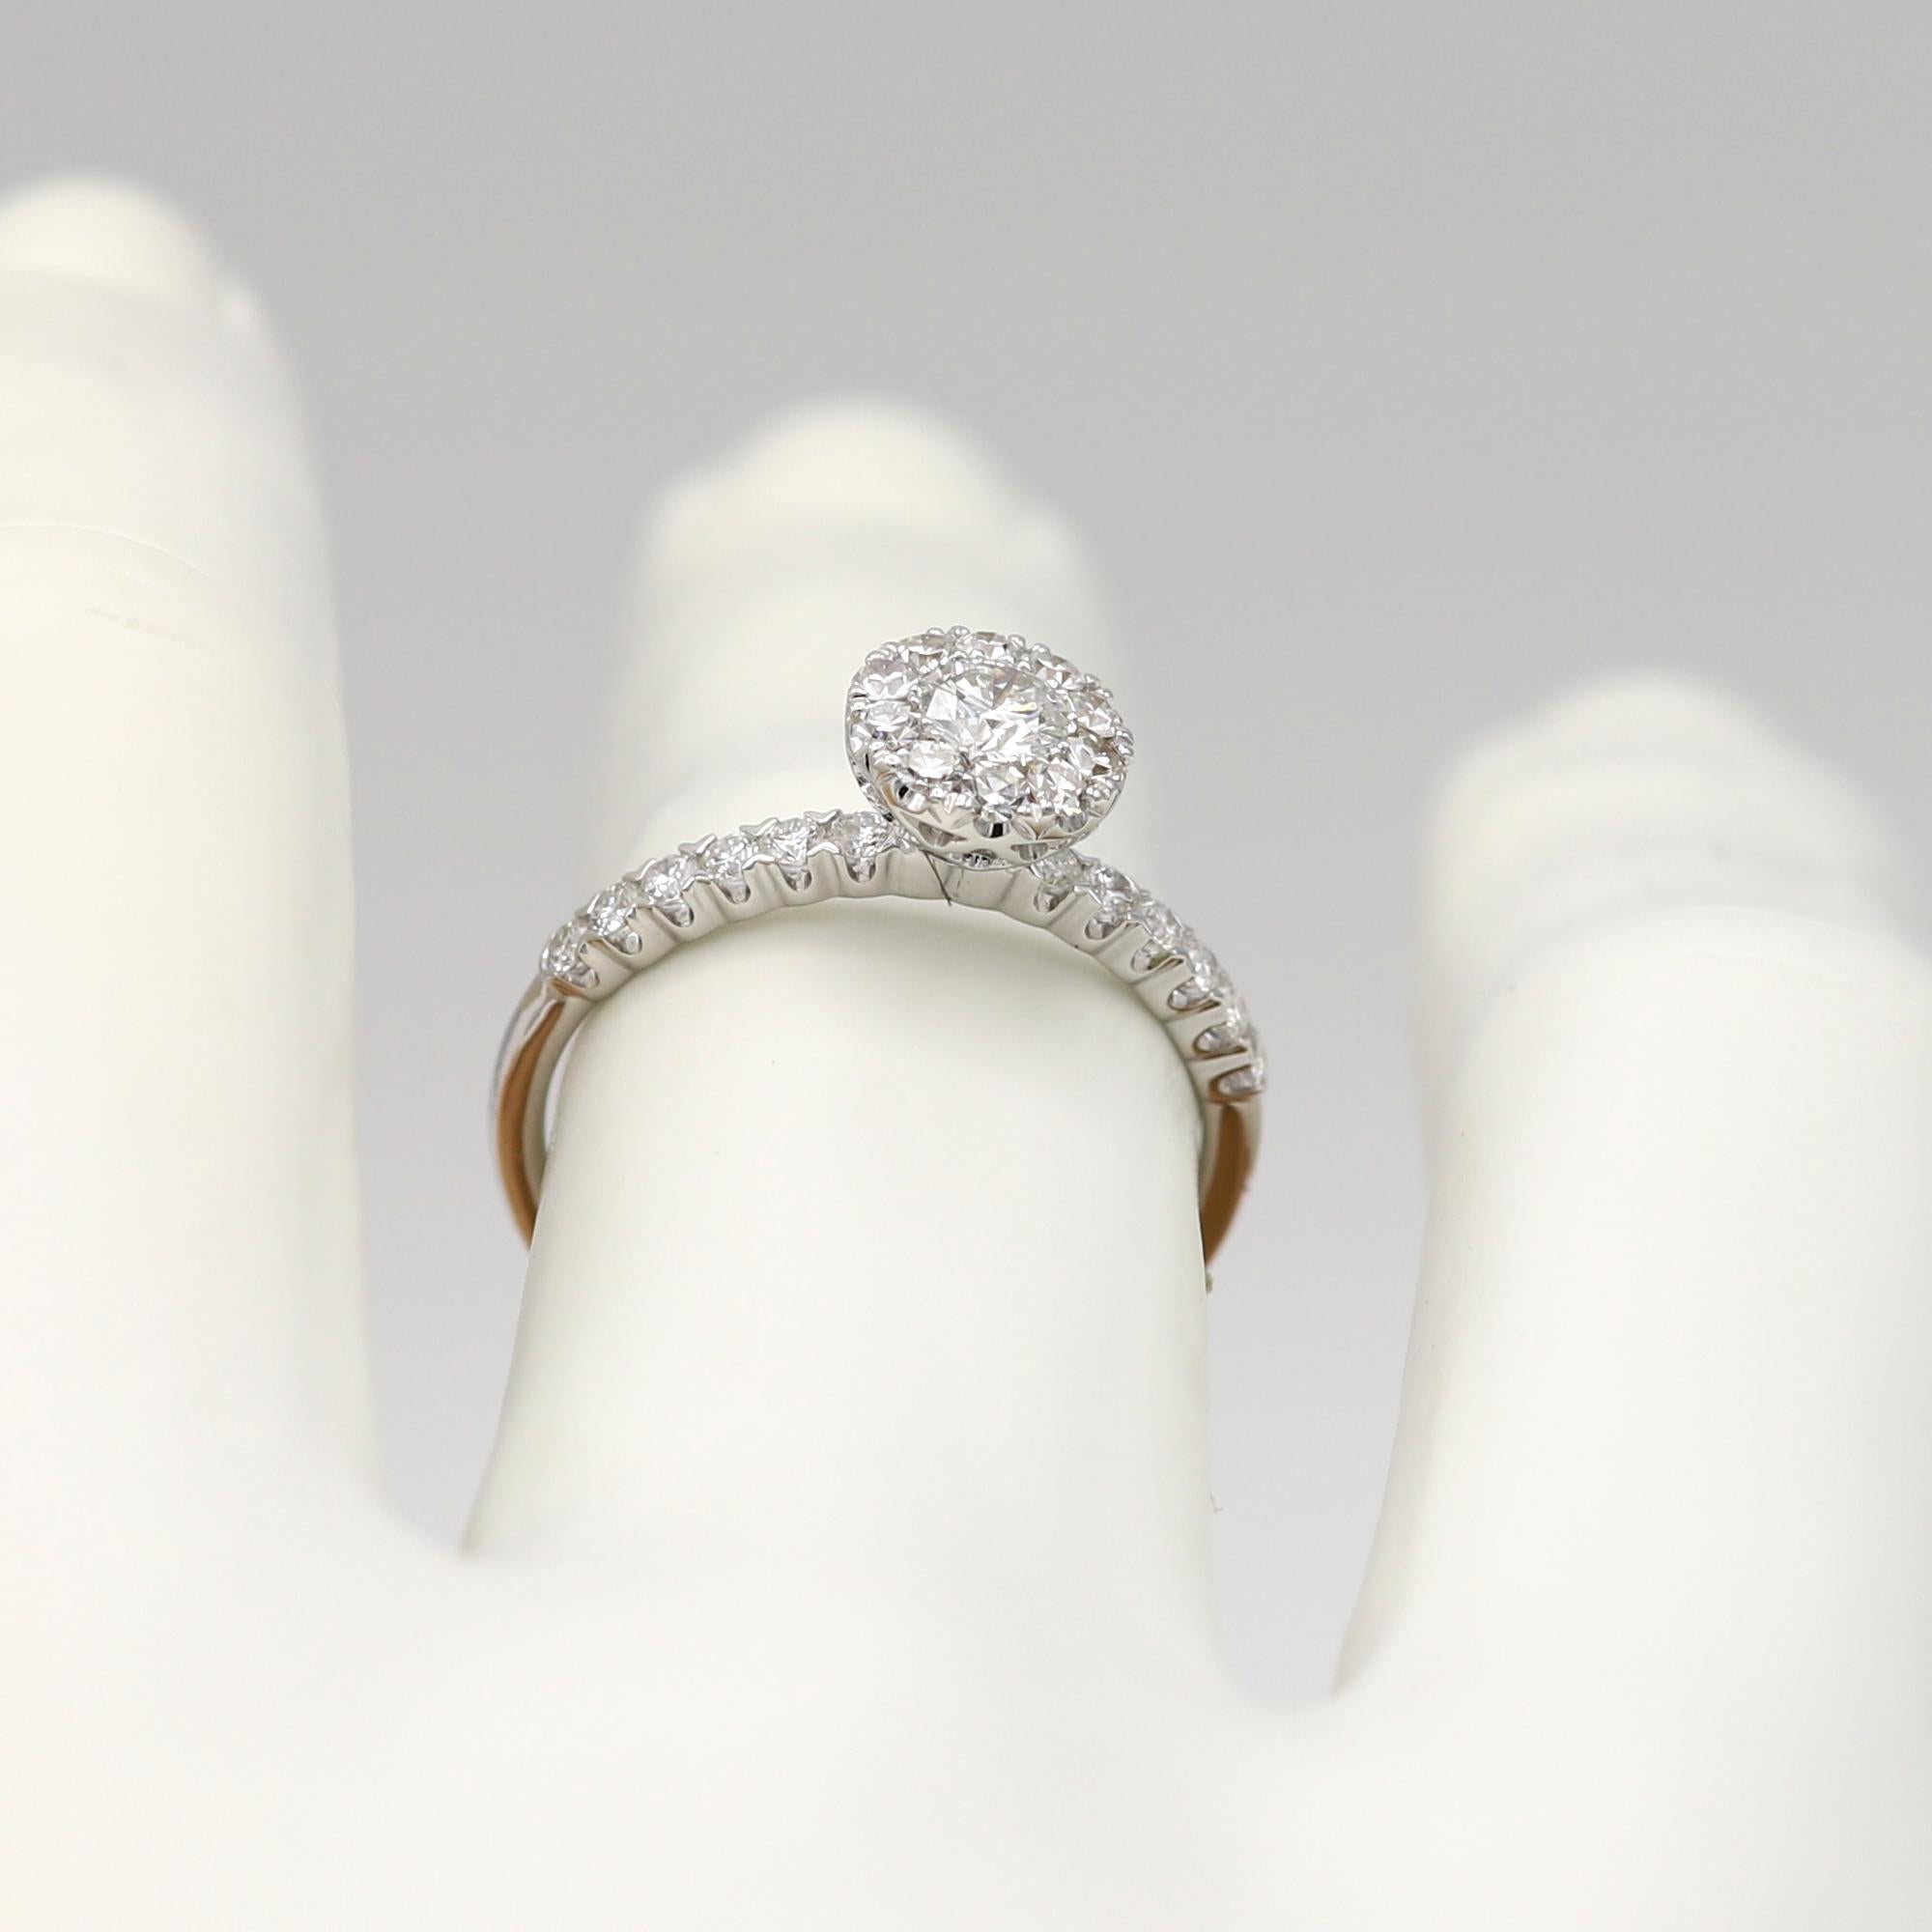 High Quality Diamond Ring - Super Cluster setting.
to the eye as a small distance the top area looks like one large Diamonds becuase of the pricision of the setting and the fine workmanship plus the sparkling white diamonds - all combine produced a